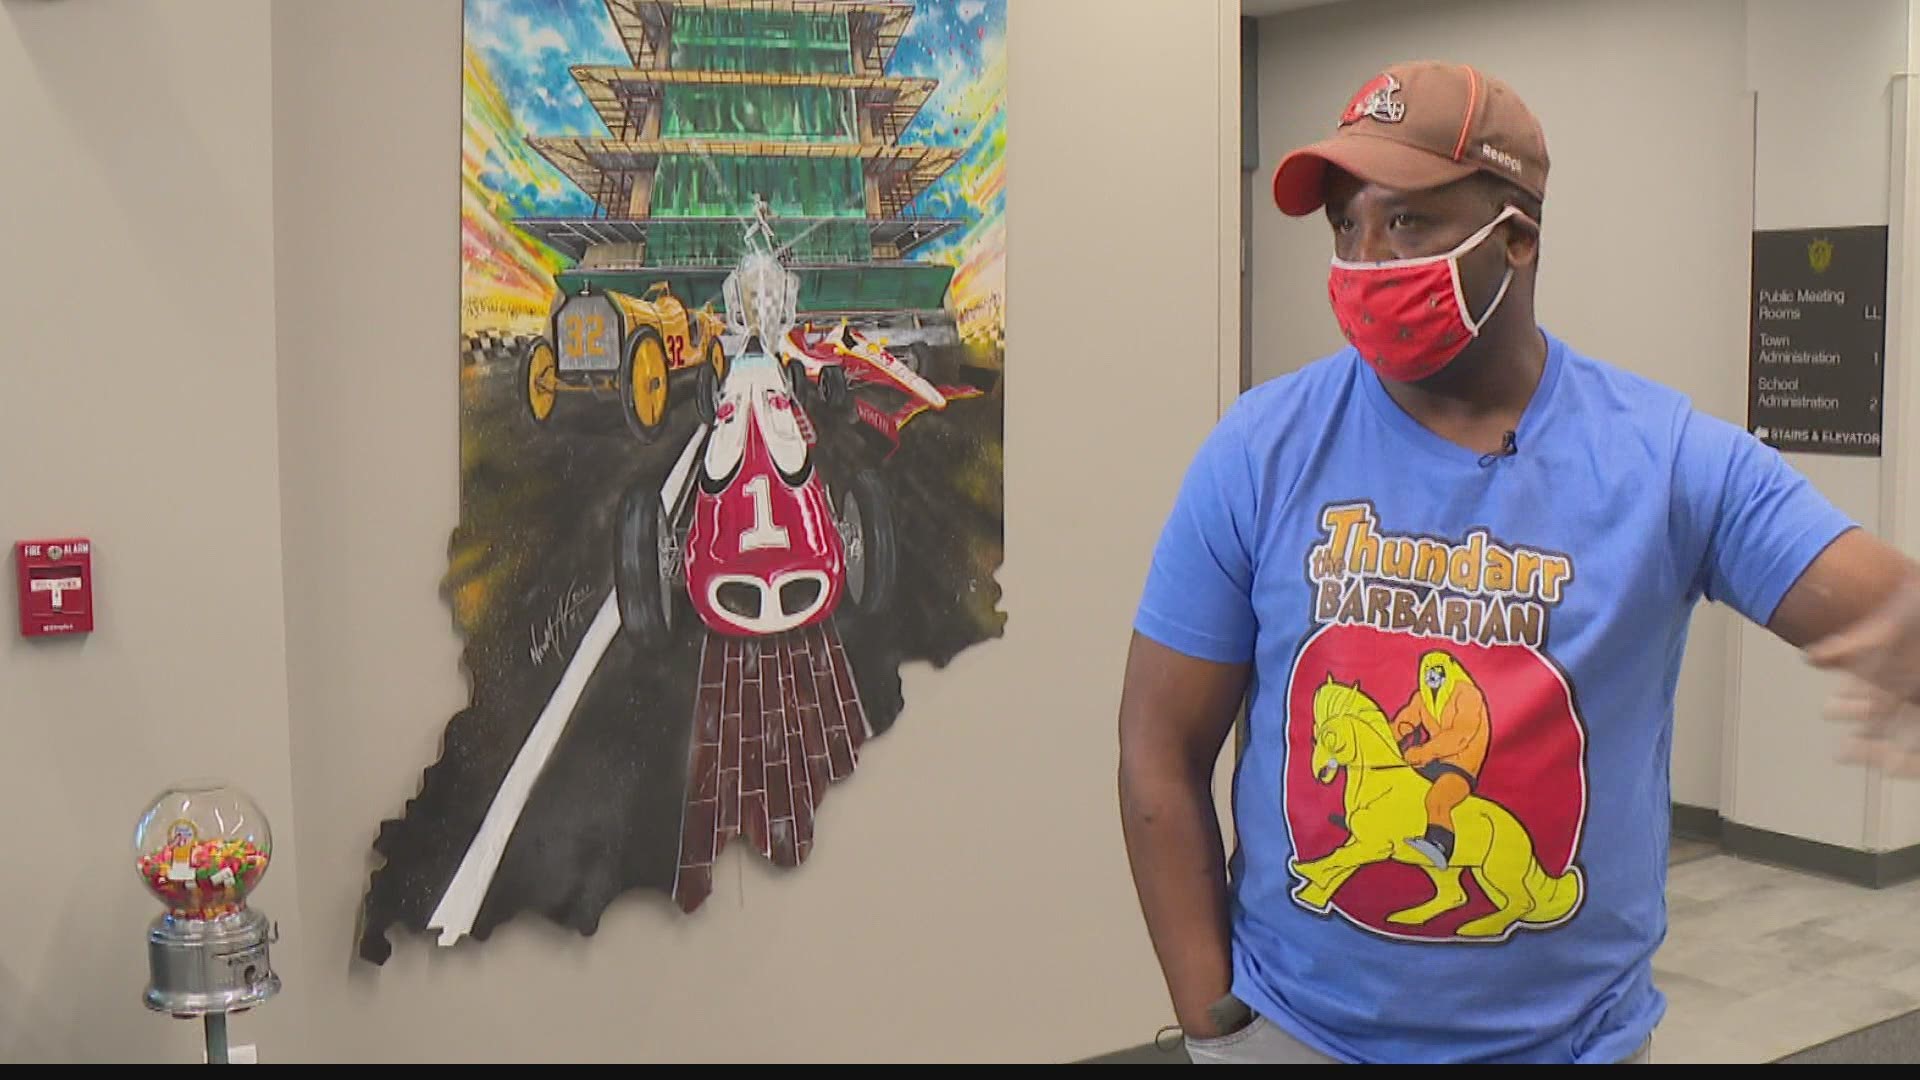 An Indiana artist who created works showcasing the uniqueness of last year's Indianapolis 500 now has a permanent display in the Town of Speedway.